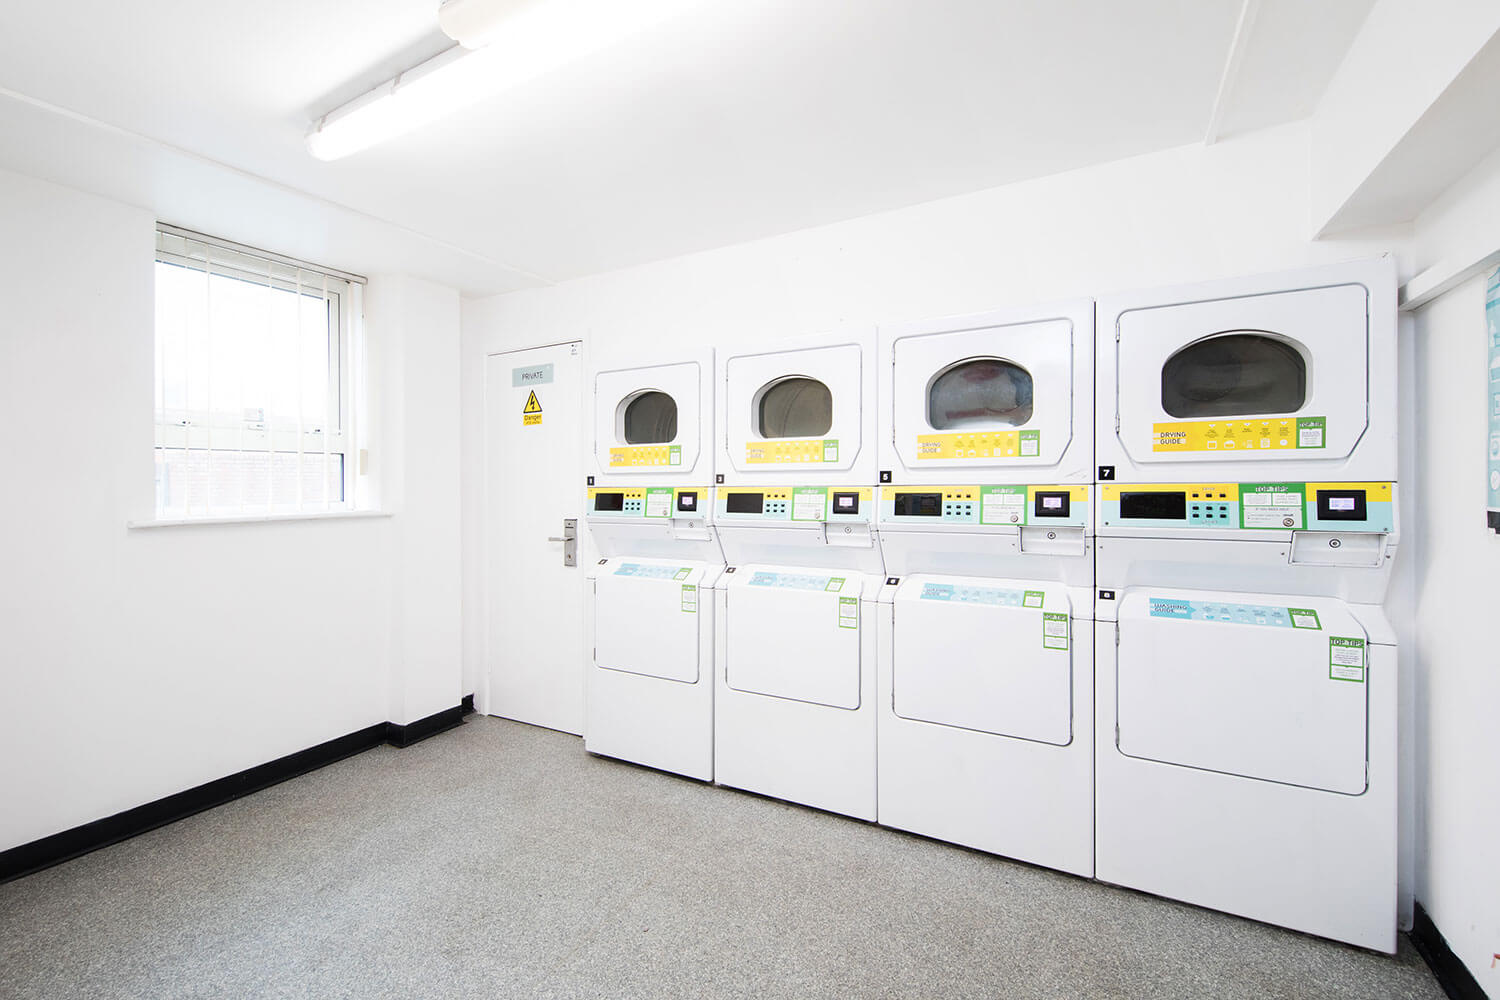 Laundry room with washing machines at Raglan House student accommodation in Coventry